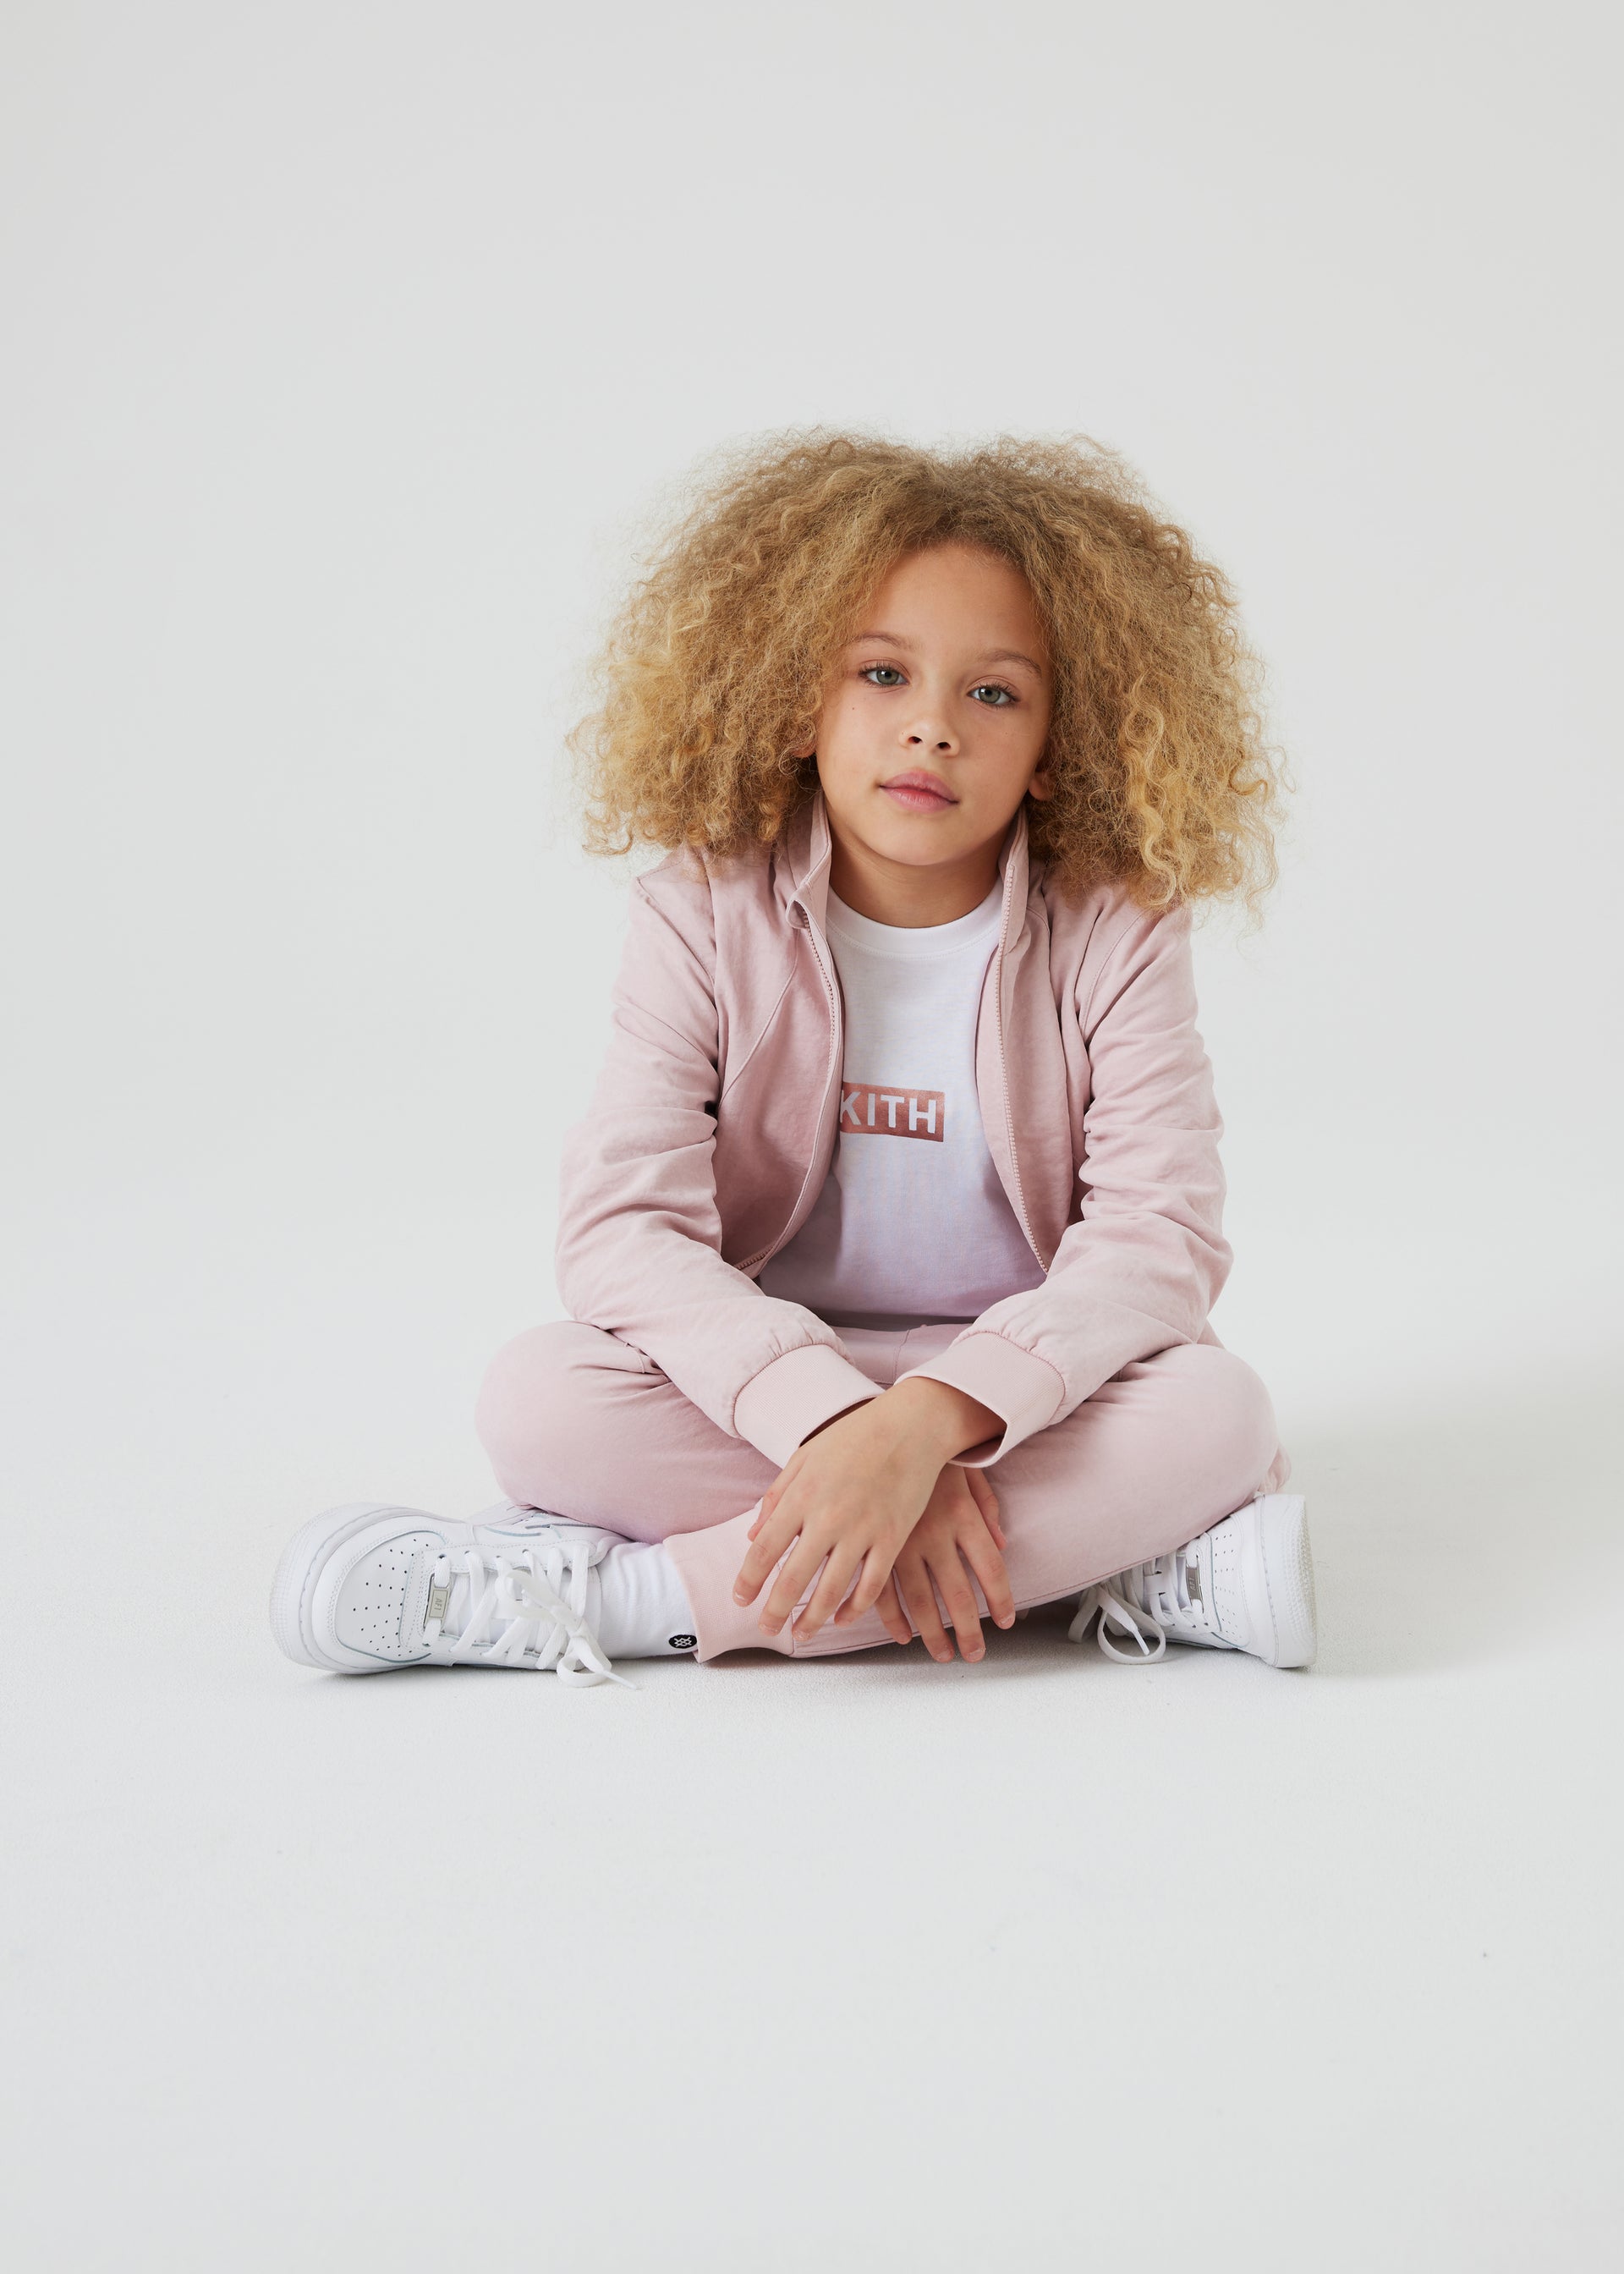 Kith Kids Spring Active - Look 6